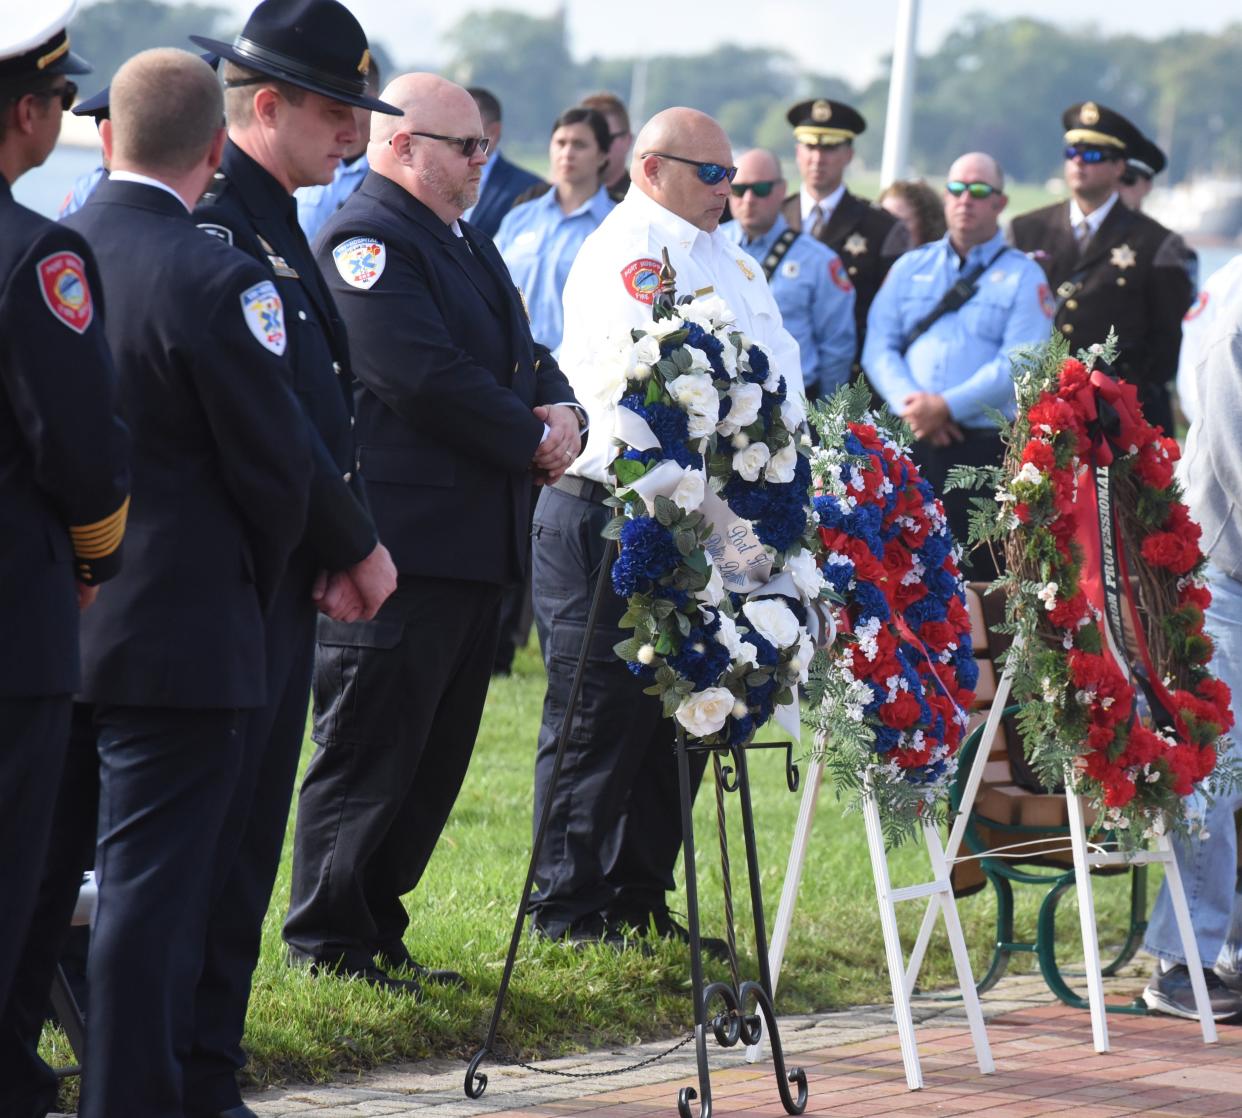 Three wreaths were presented in honor of the fallen at the Sept. 11 memorial on Sept. 11, 2023.